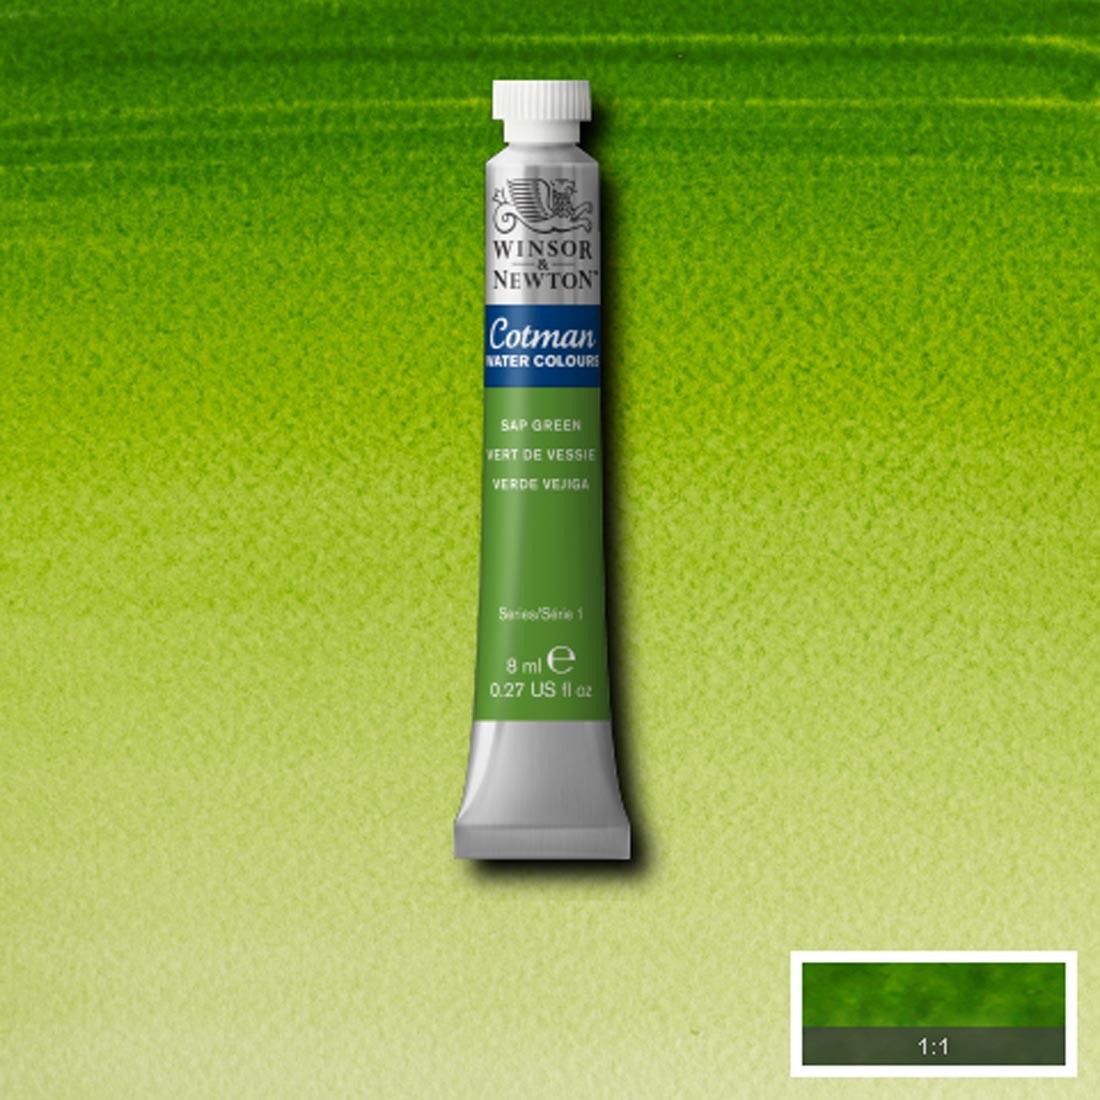 Tube of Sap Green Winsor and Newton Cotman Water Colour with a paint swatch for the background